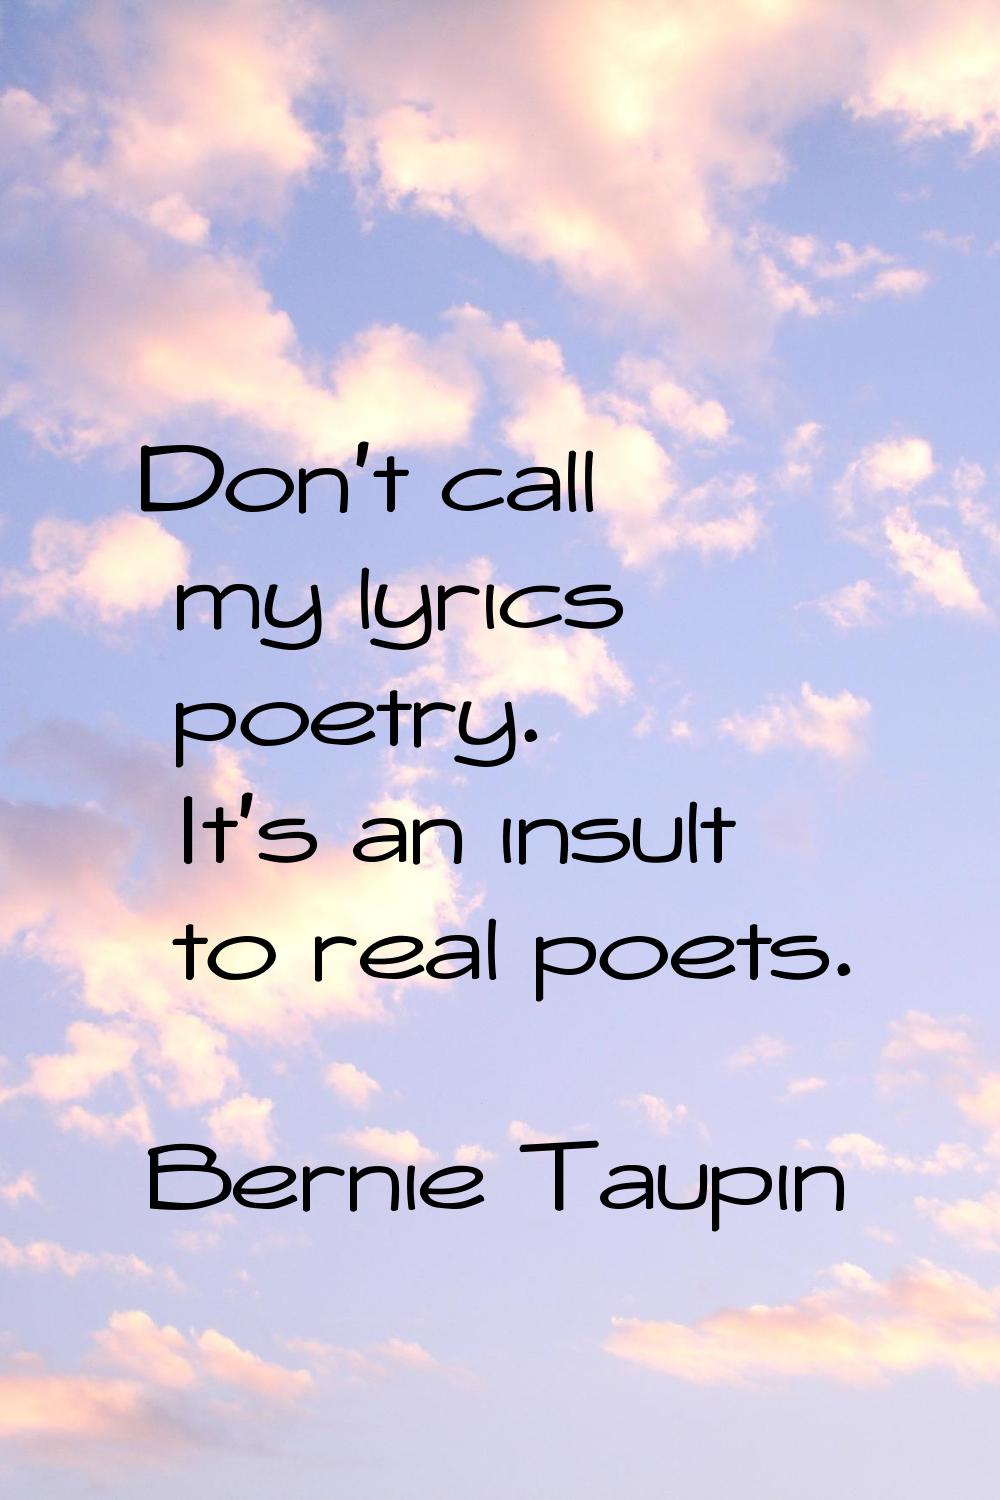 Don't call my lyrics poetry. It's an insult to real poets.